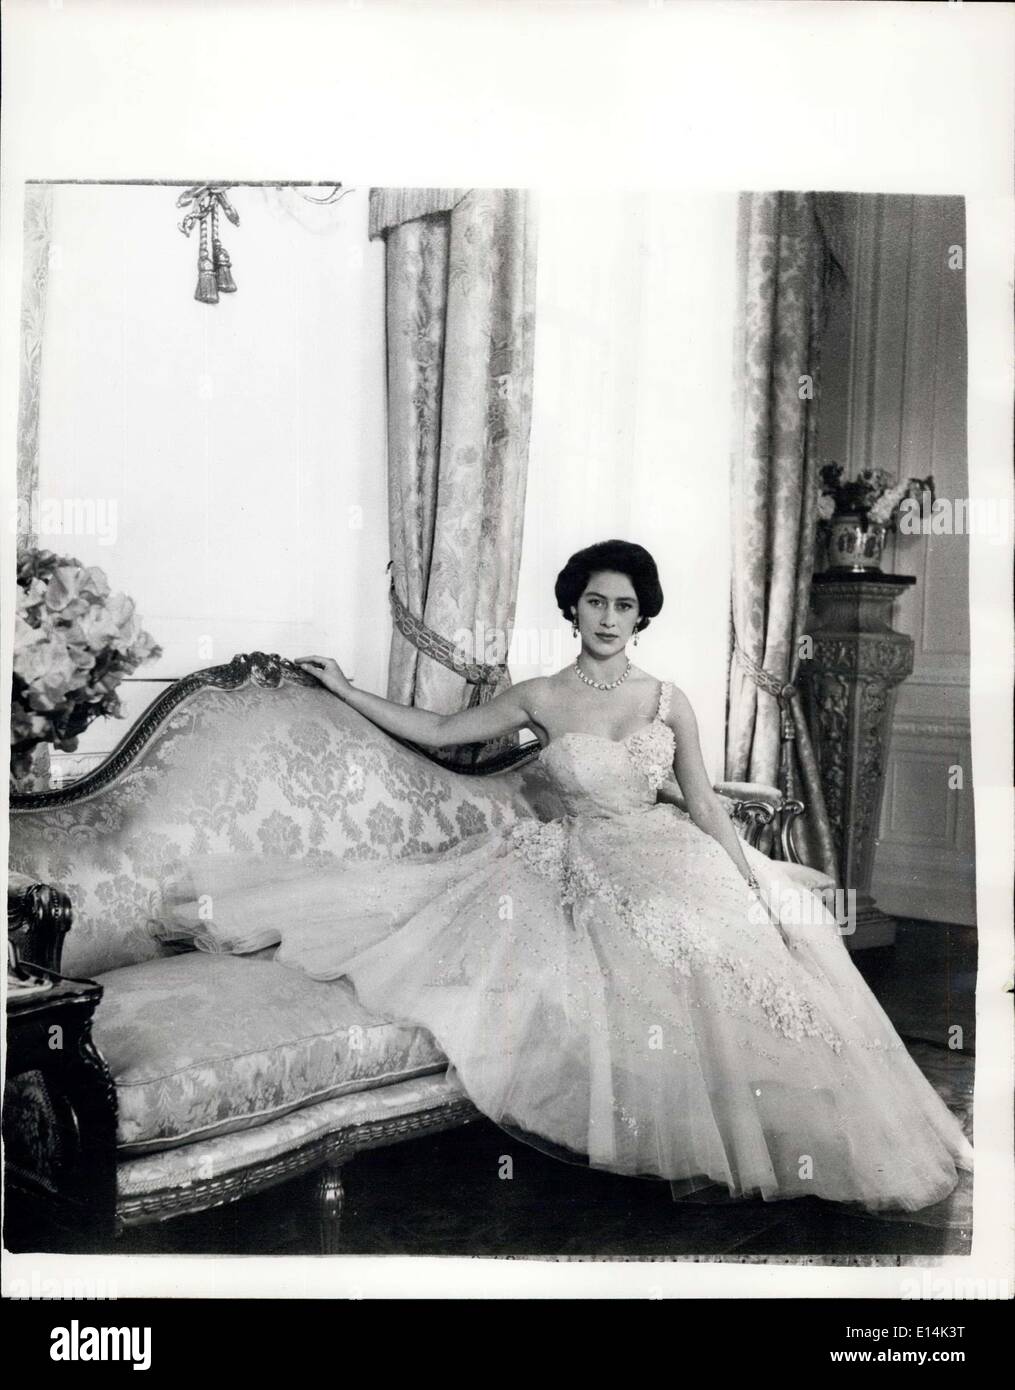 Apr. 05, 2012 - Princess Margaret 26. Princess Margaret, photographed by Cecil Beaton in the Drawing Room of Clarence House, her London residence. The photo was made in connection with Princess Margaret's 26th birthday on August 21. Her Royal Highness wears an evening dress of pink tulle embroidered with flowers and sequins. Her hair is worn short, softly waved, and piled high on her head. Stock Photo